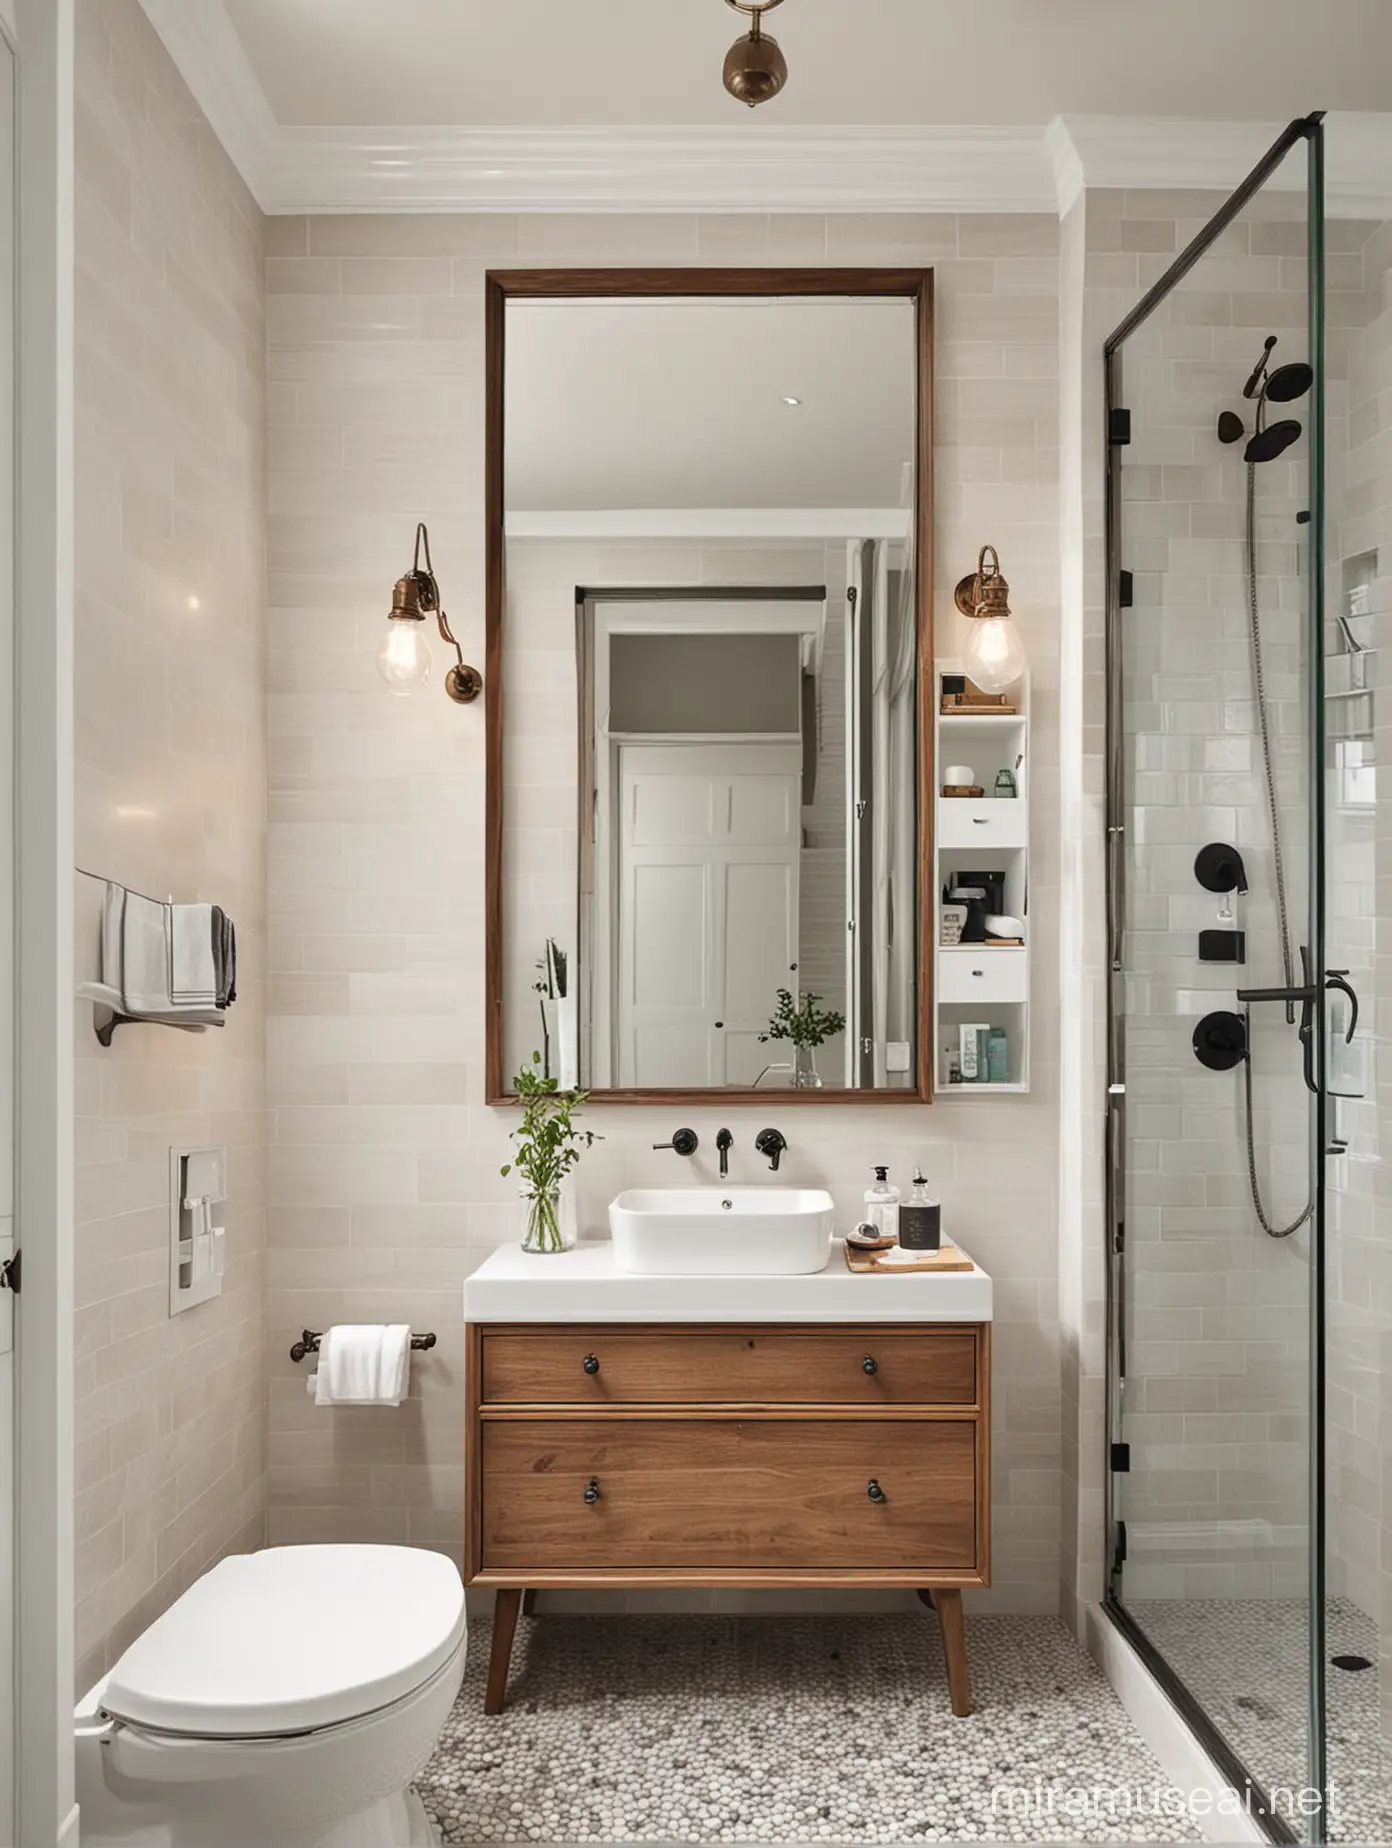 Compact elegance meets practicality in this charming bathroom.